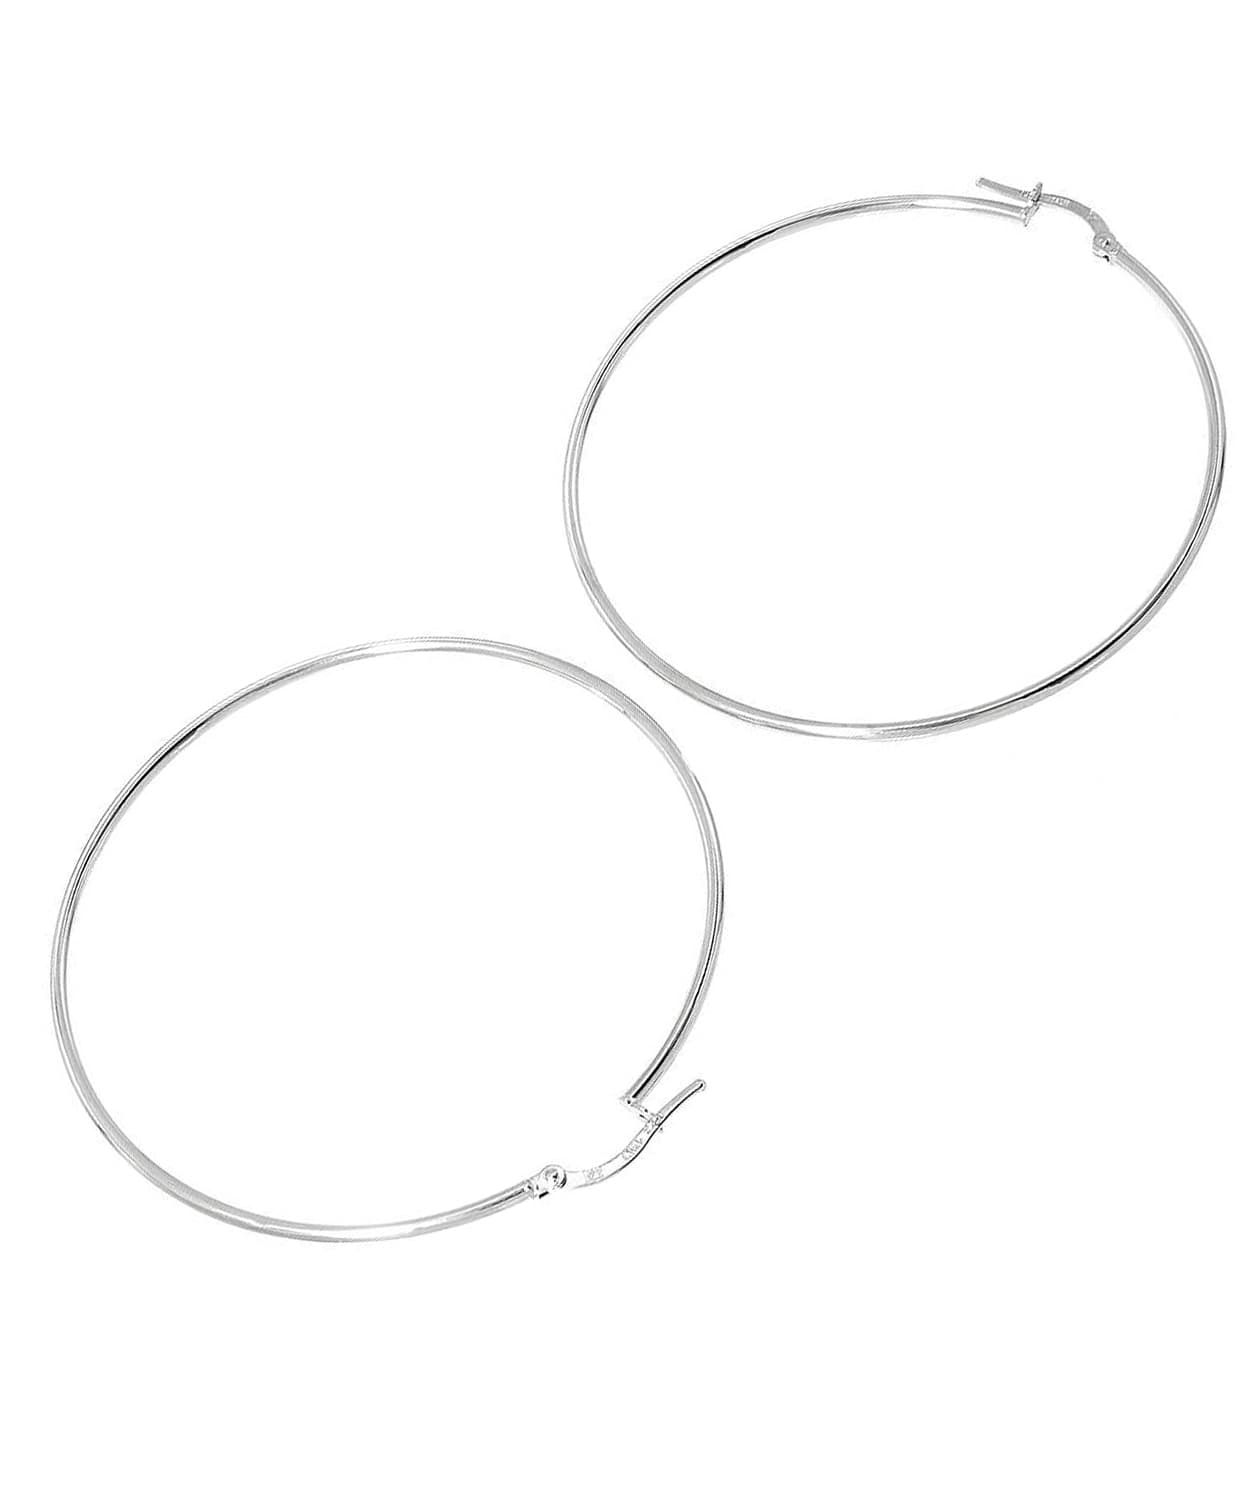 53mm Large 14k White Gold Classic Hoop Earrings View 2